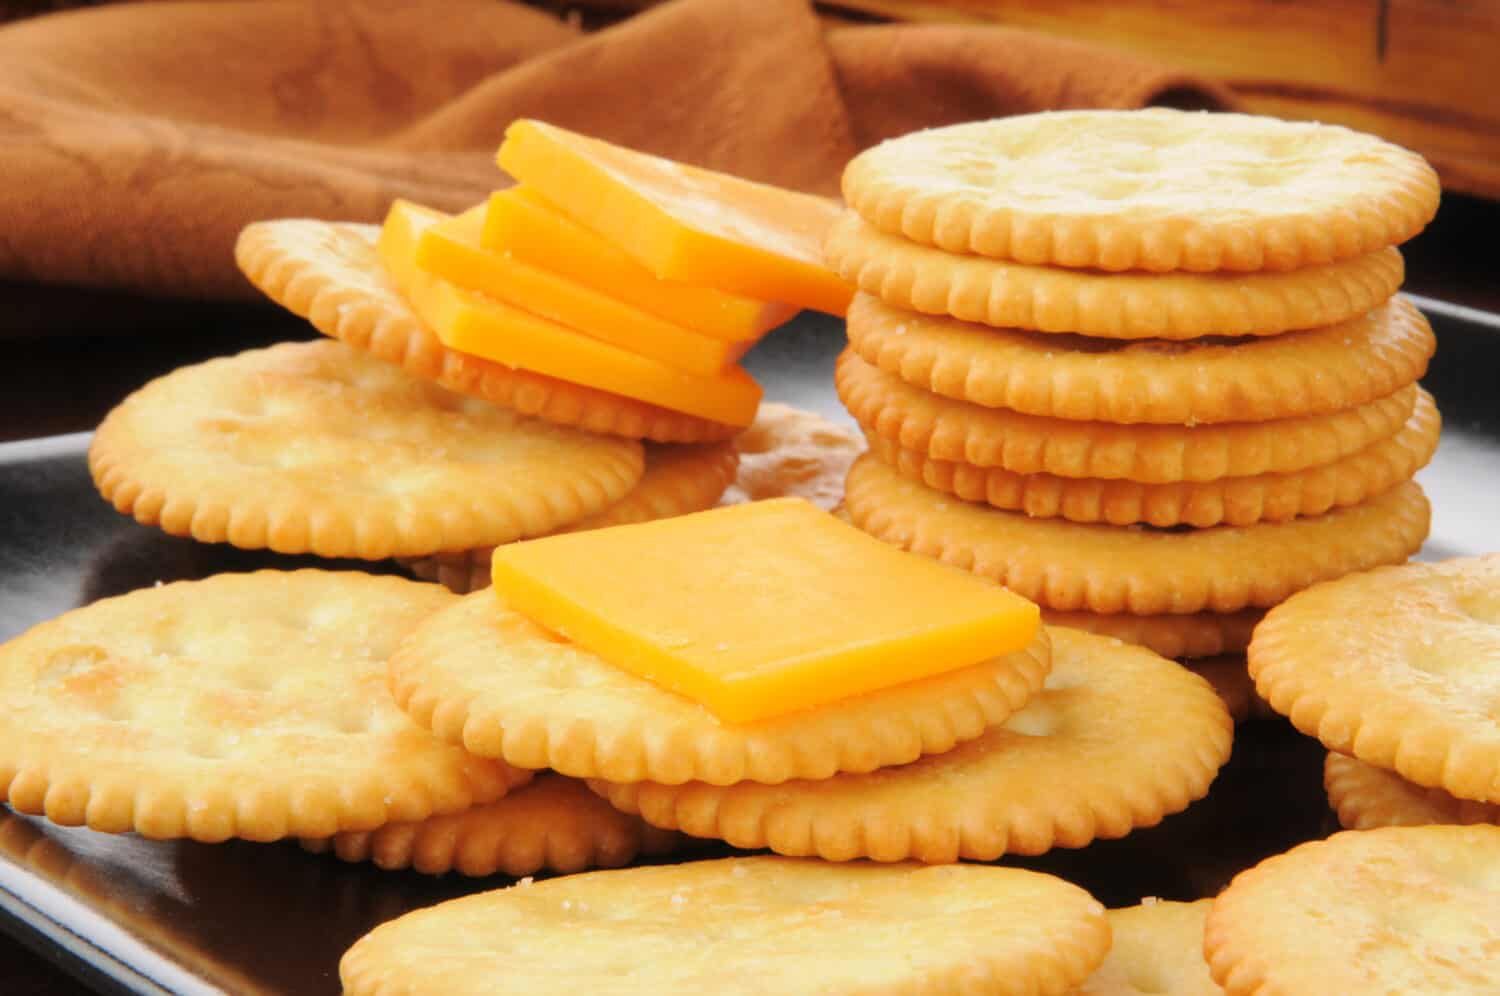 Closeup of a snack plate of cheese and crackers